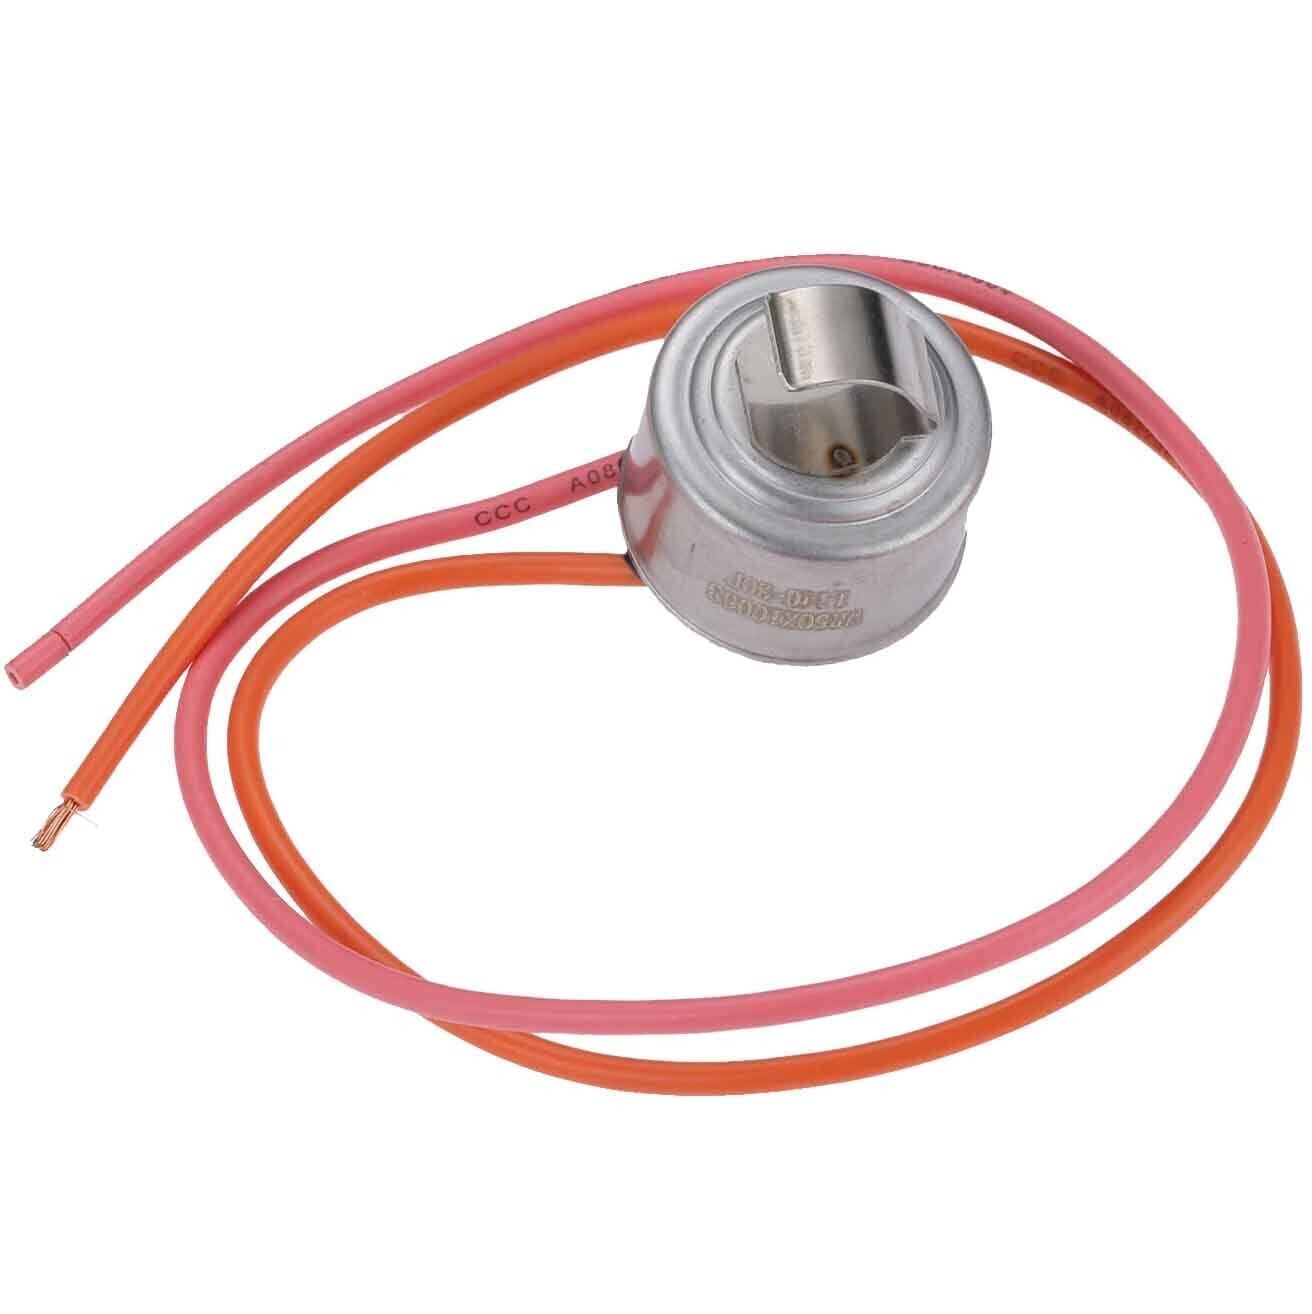 Primary image for OEM Defrost Thermostat For GE GDE20ETEBRWW GFSS2KEXASS GSC23LSRCSS GSH22JFXACC